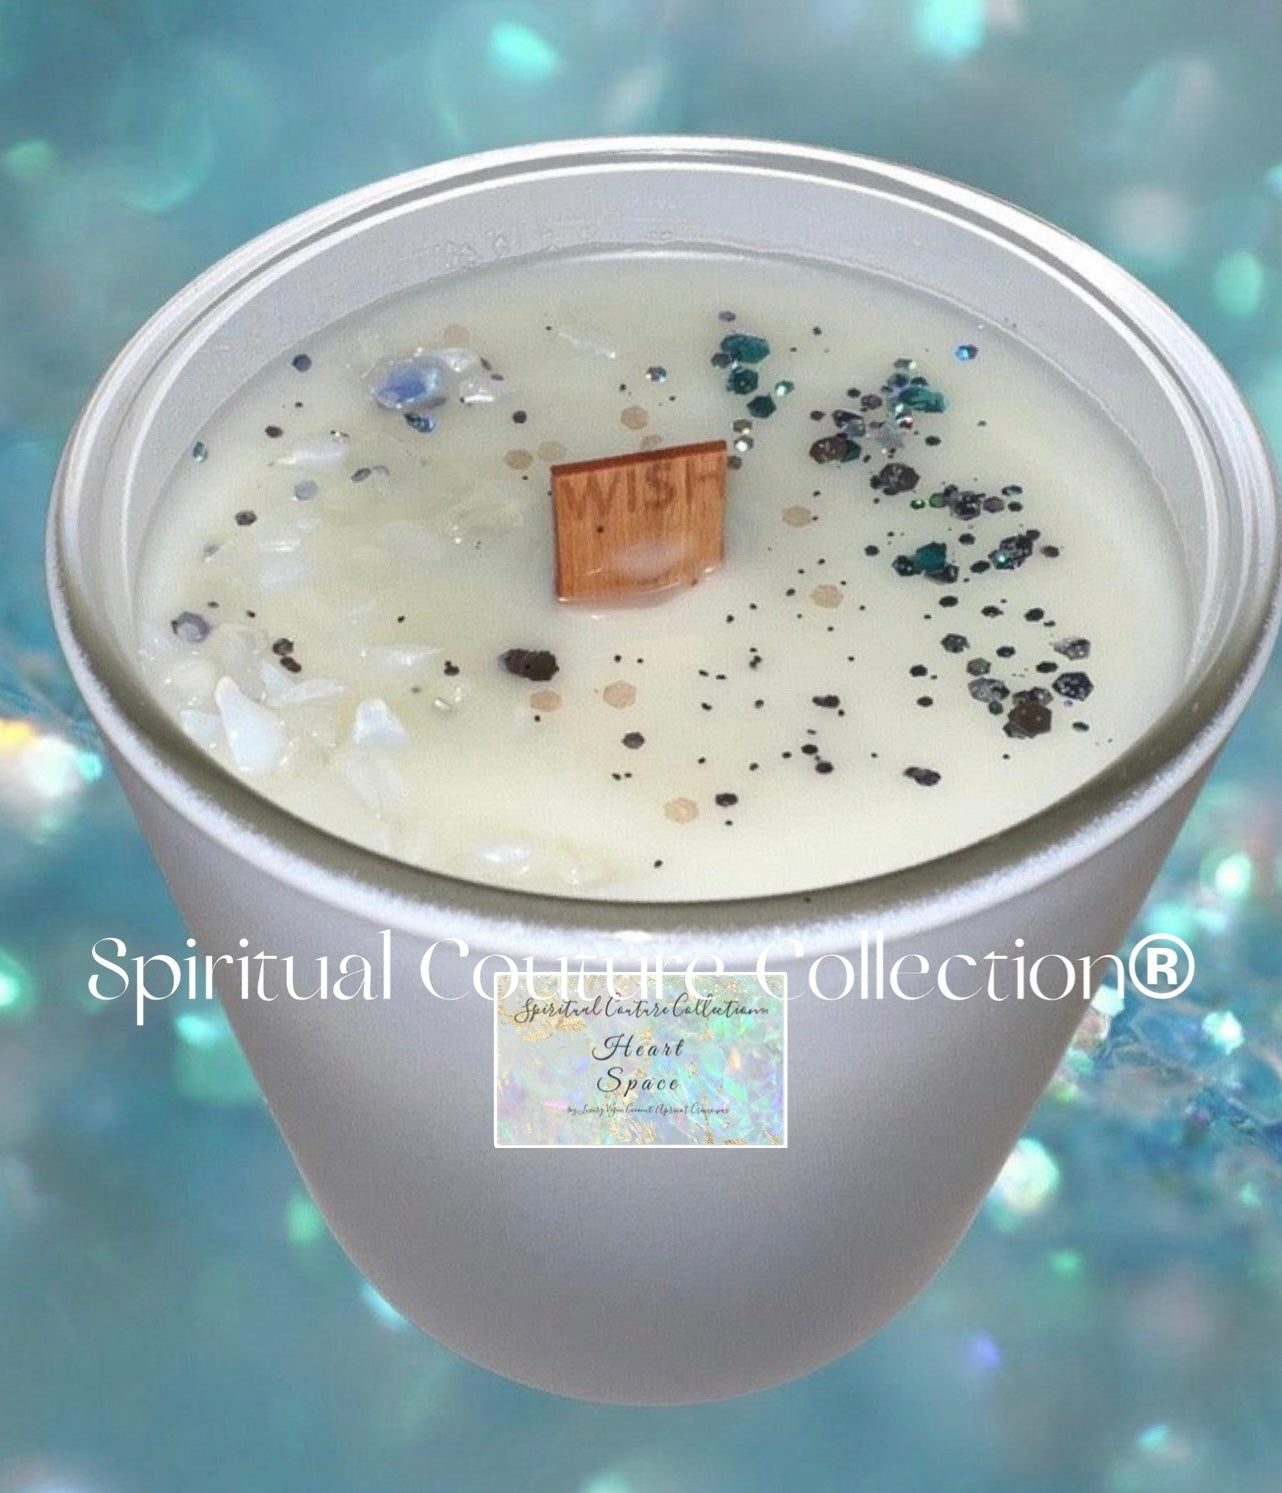 Heart Space by Spiritual Couture Collection® Spiritual Couture Collection 